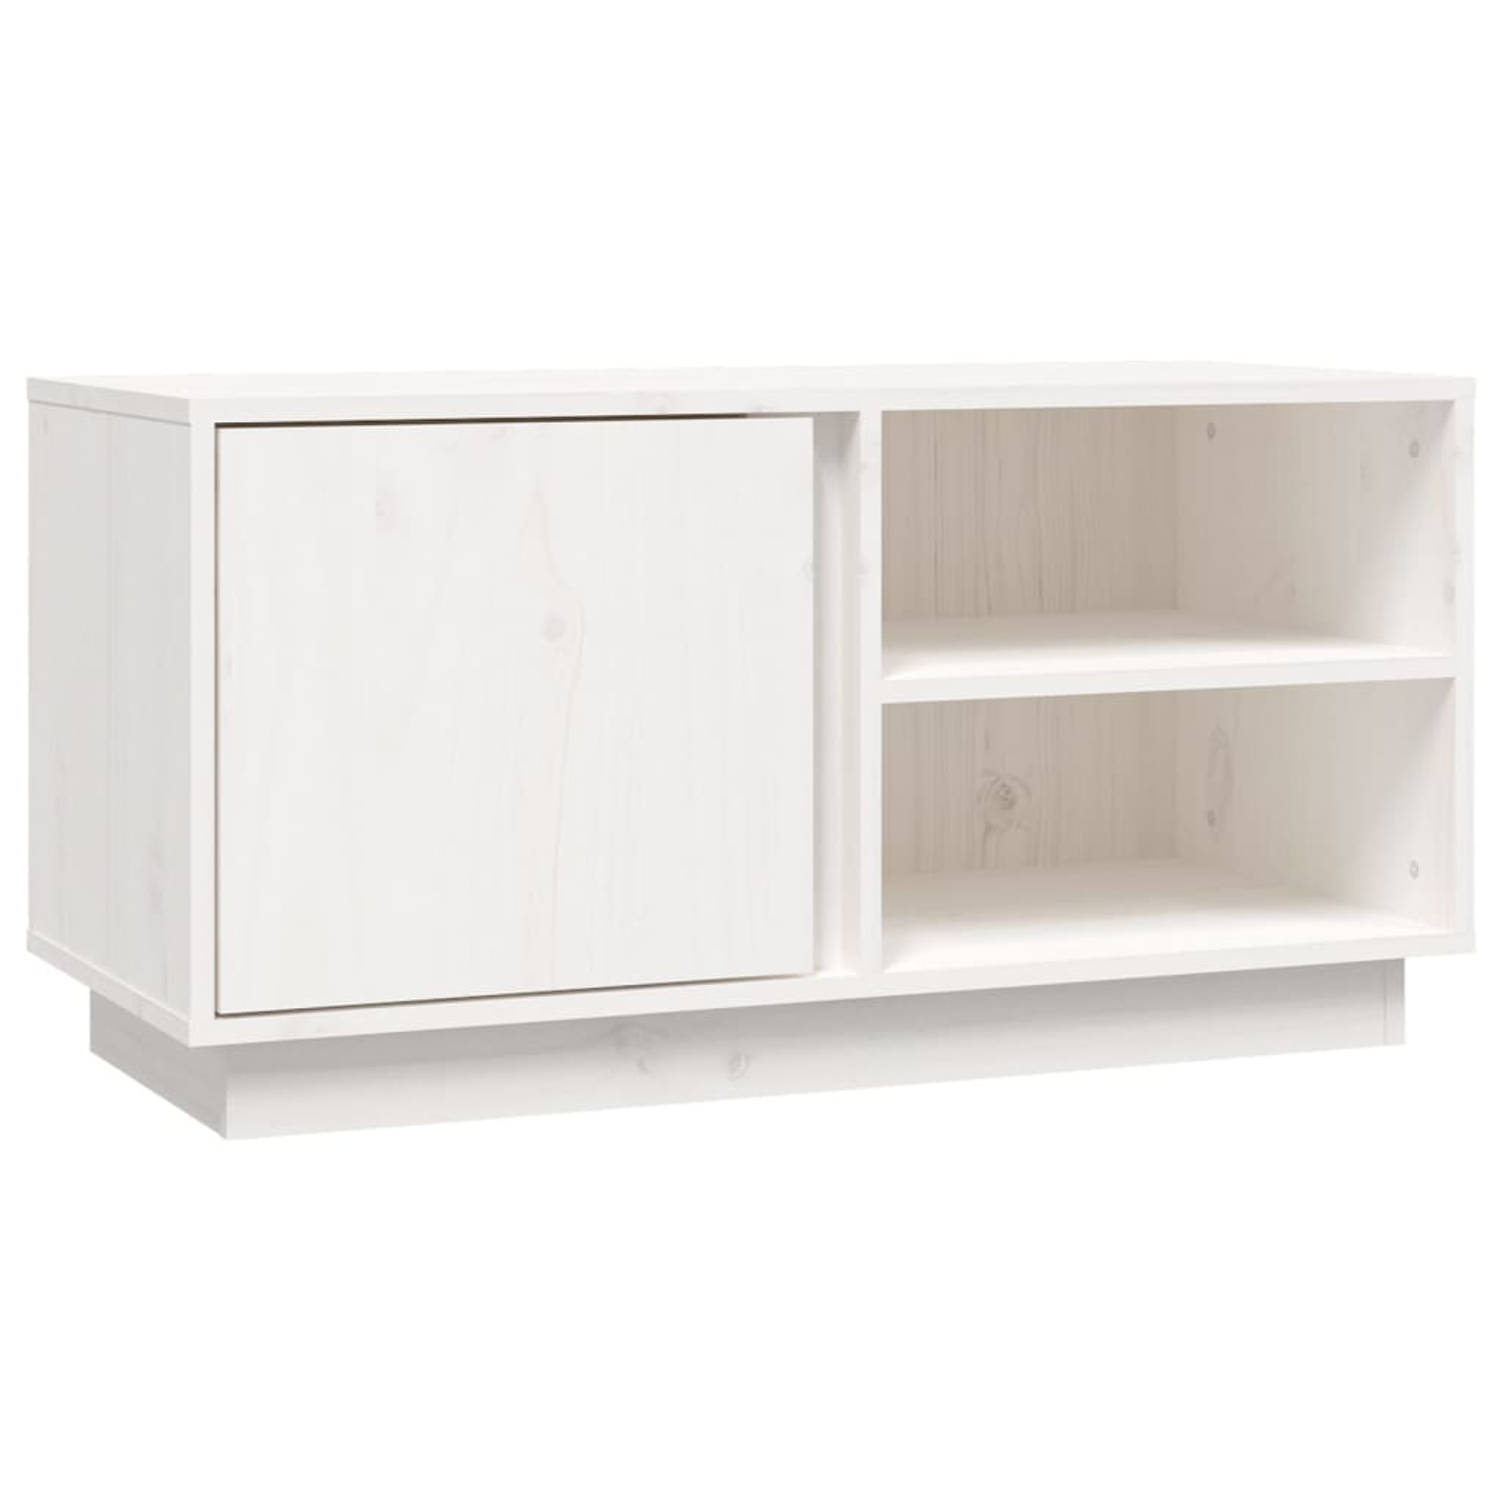 The Living Store Tv-meubel - Grenenhout - 80 x 35 x 40.5 cm - Wit